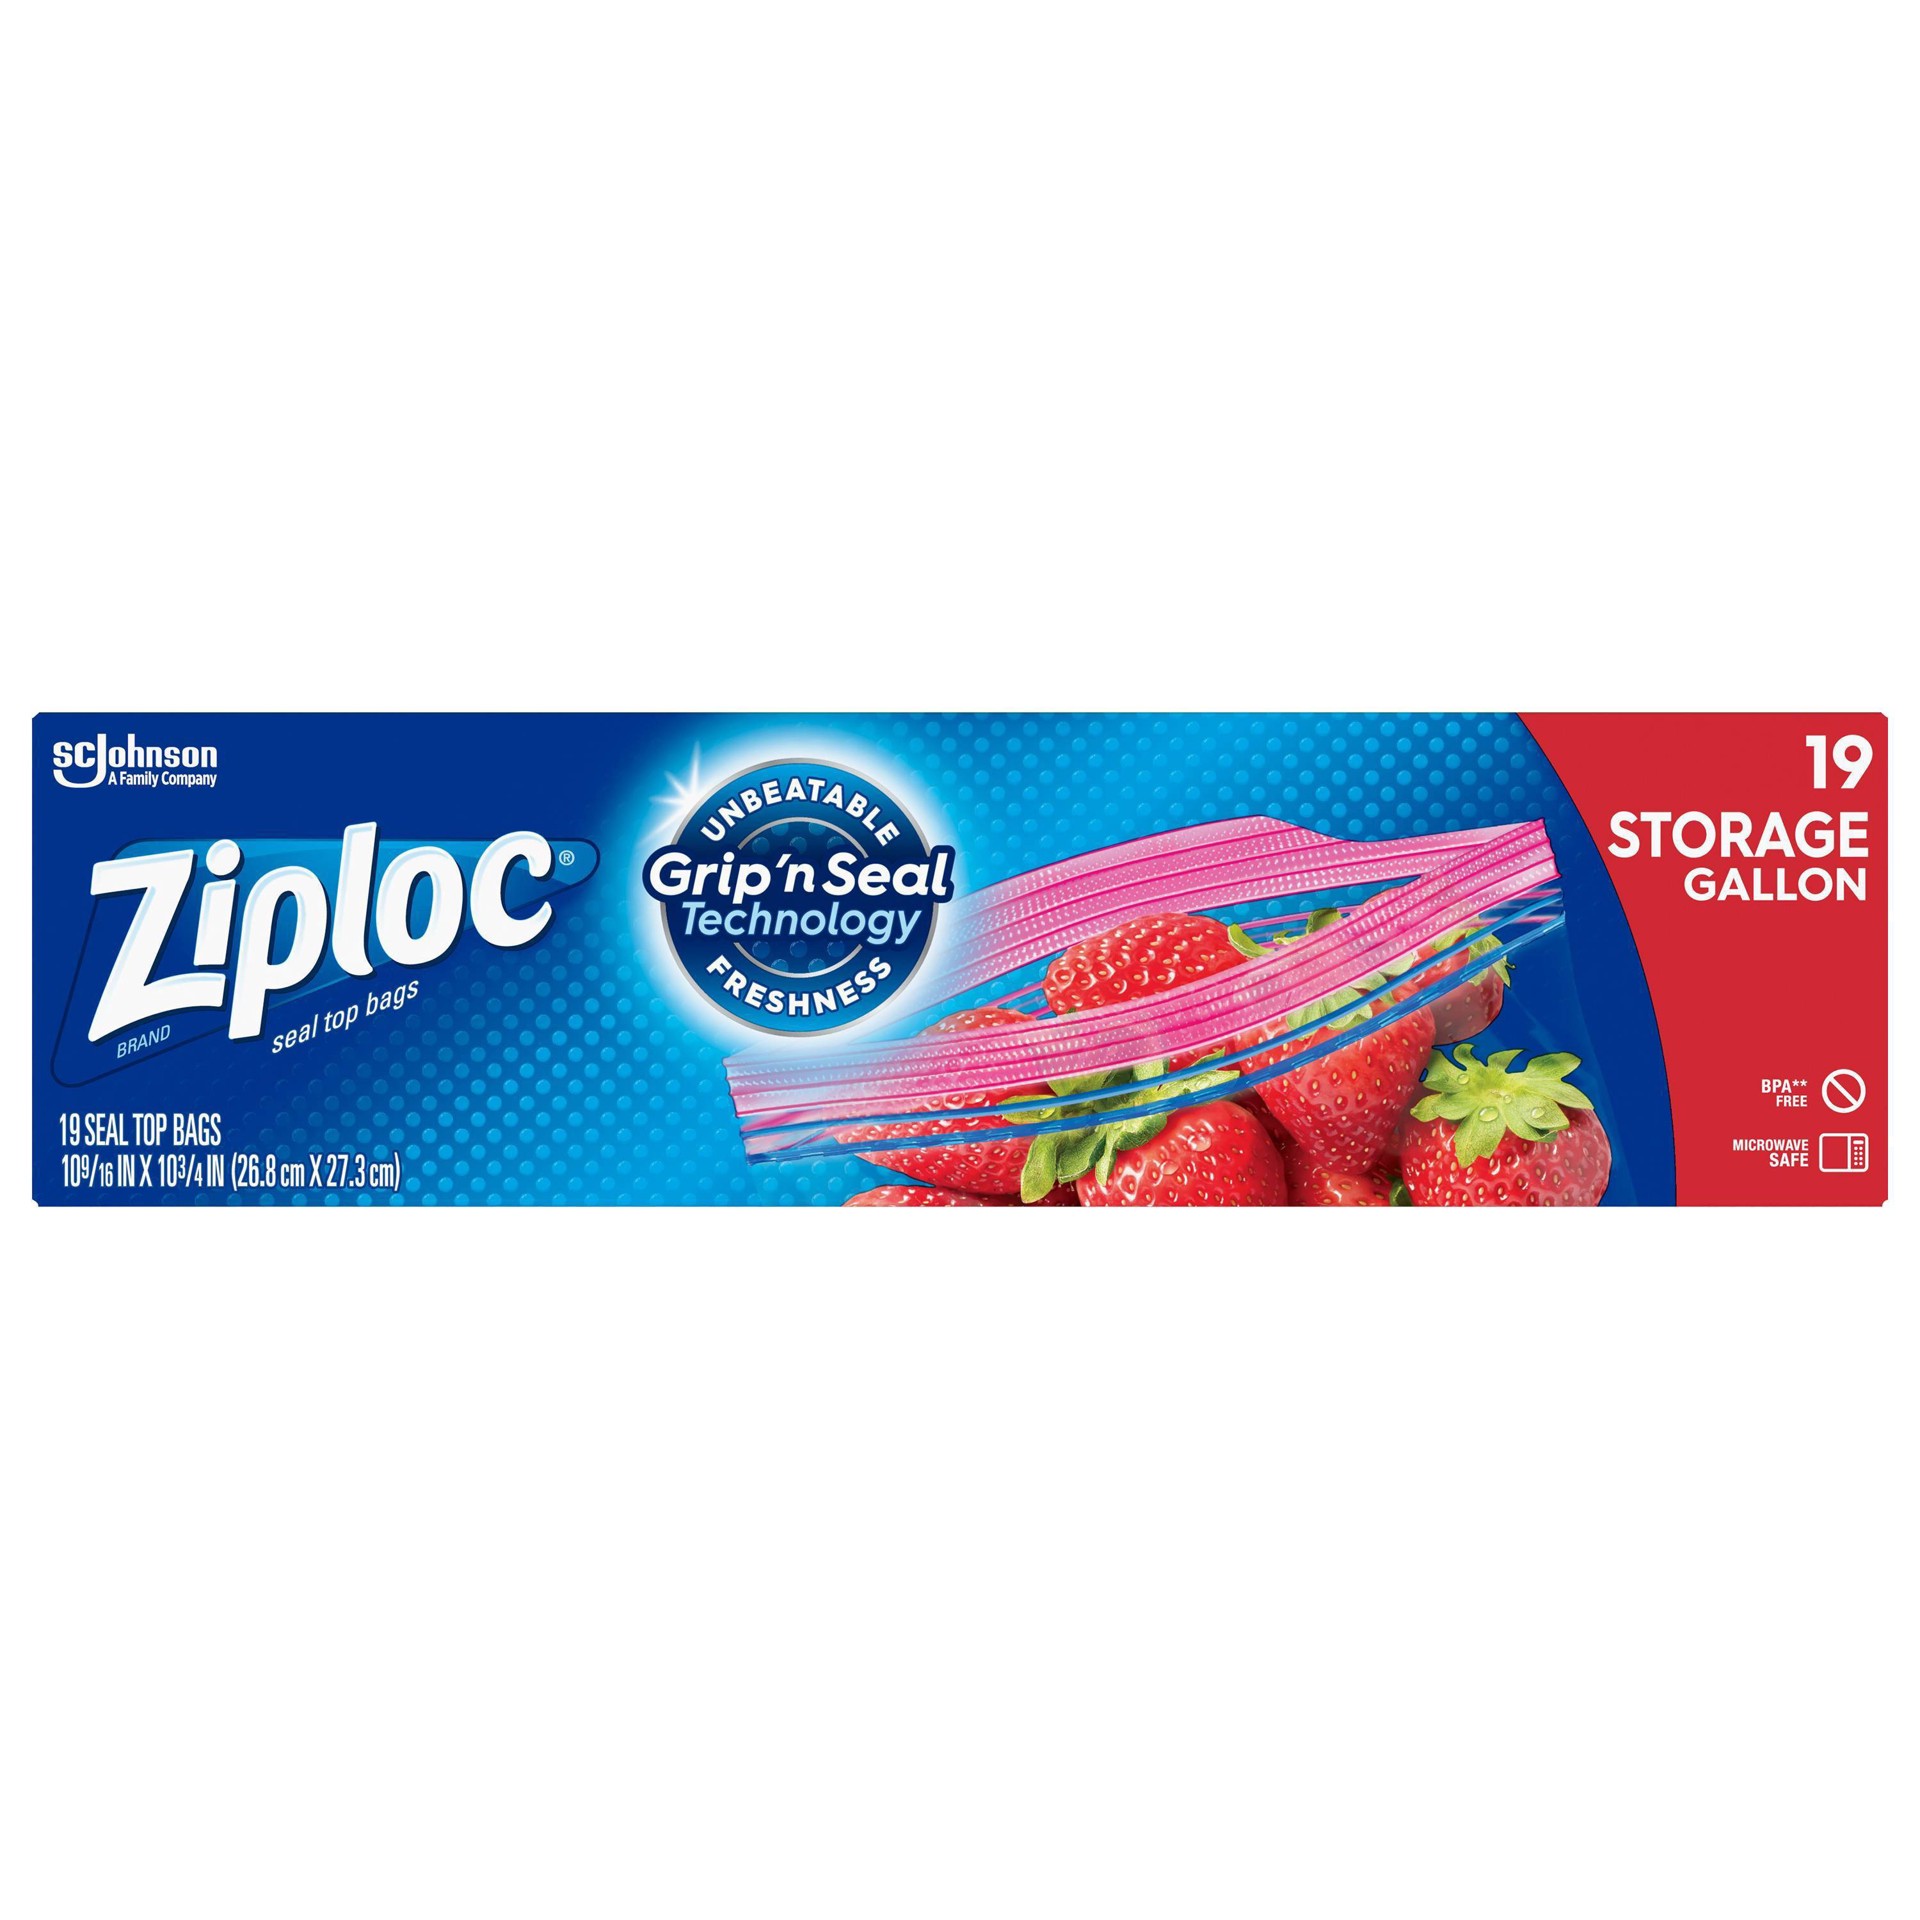 slide 1 of 14, Ziploc Storage Gallon Bags with Grip 'n Seal Technology - 19ct, 19 ct